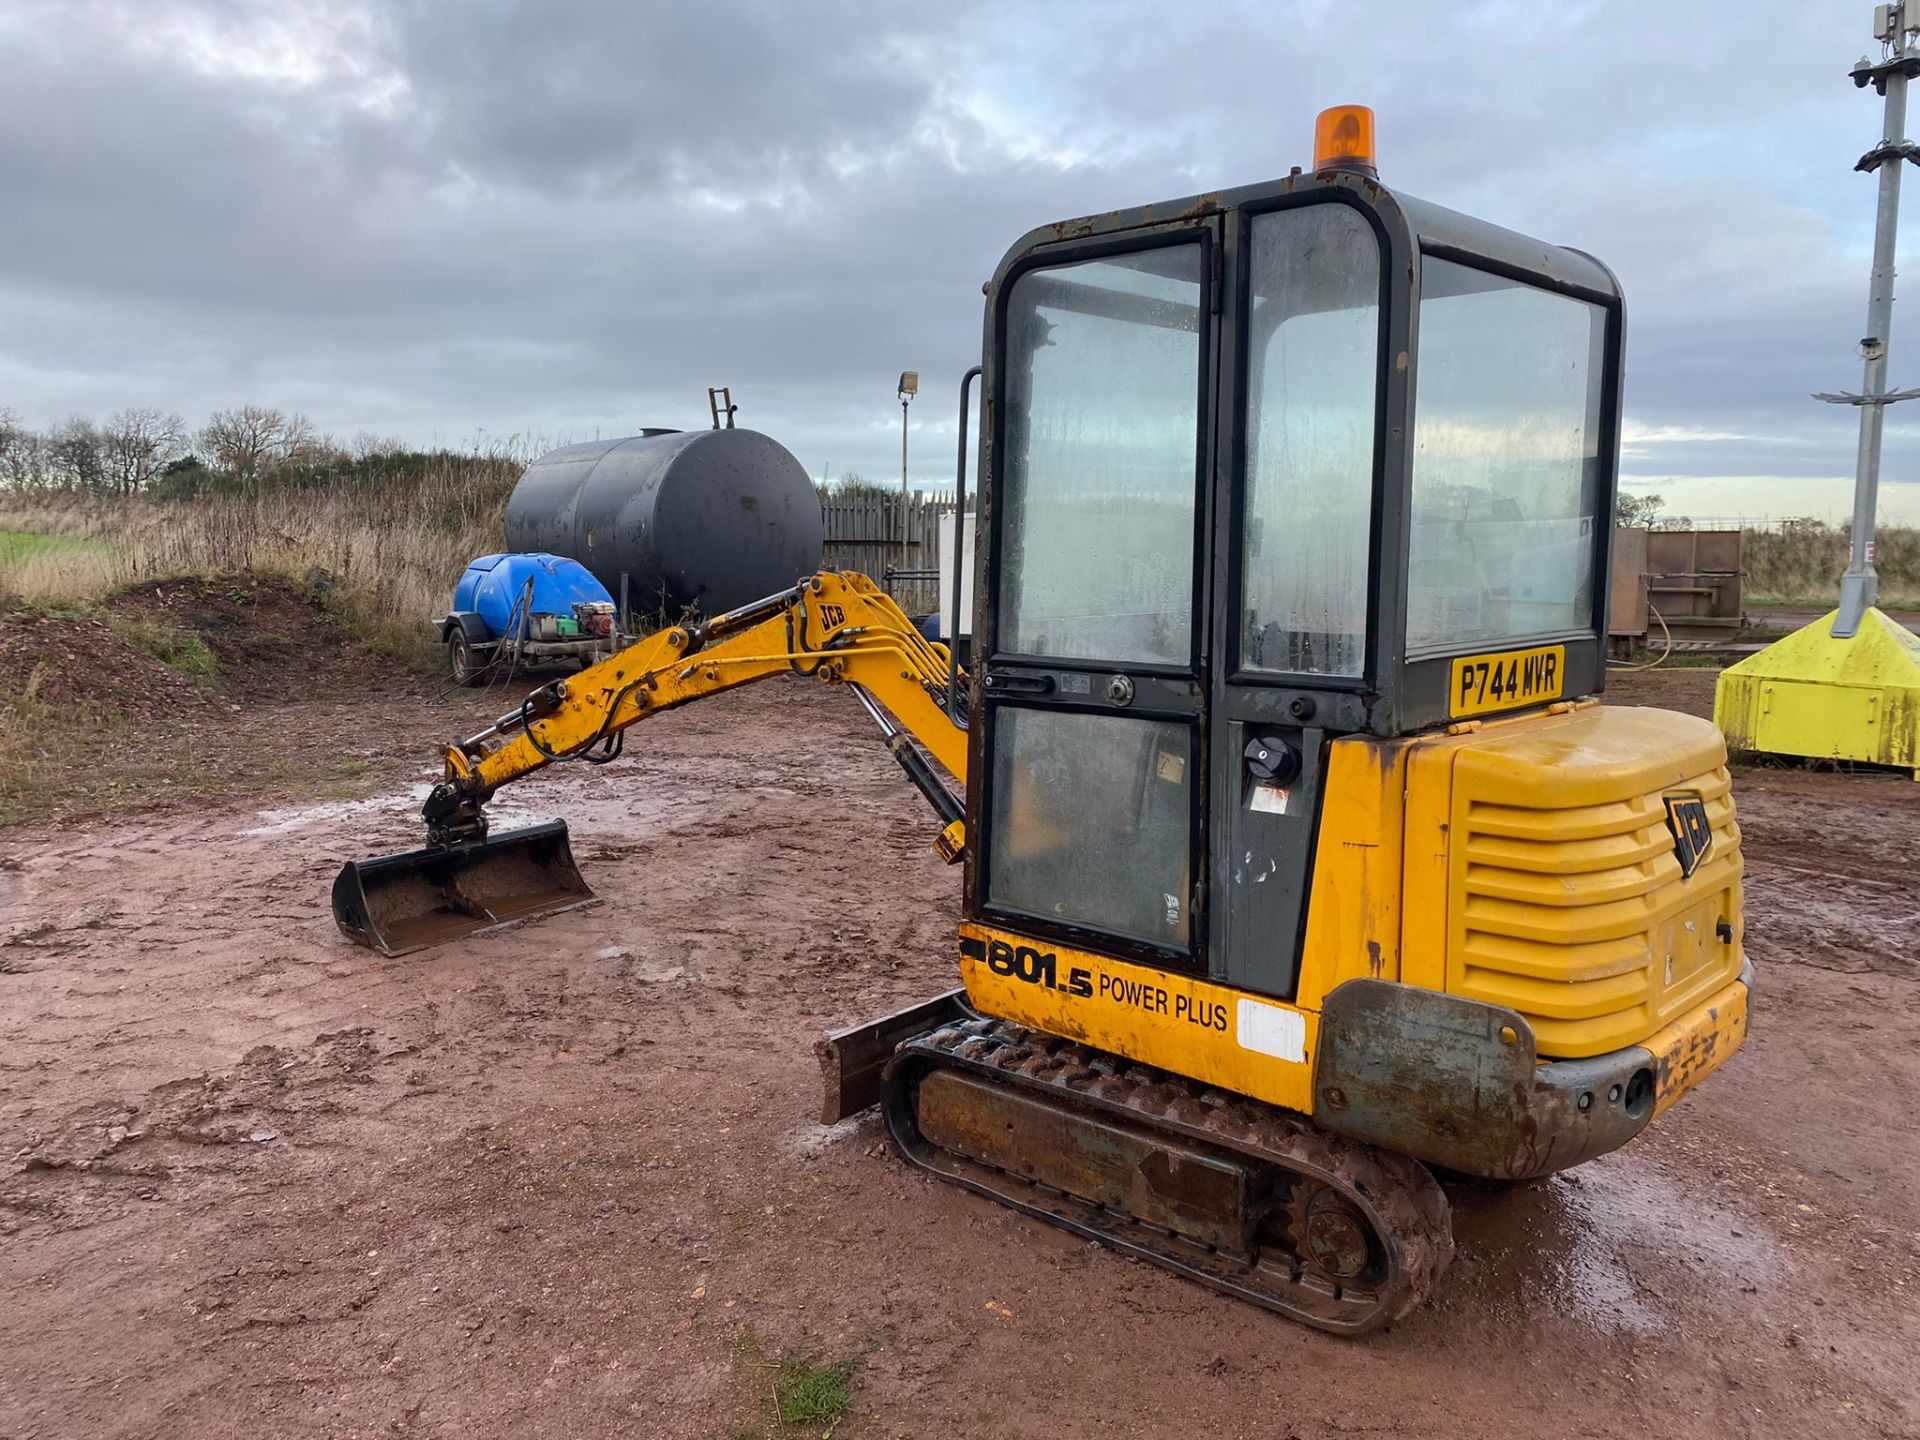 1997 JCB 801.5 POWER PLUS RUBBER TRACKED EXCAVATOR / DIGGER (P744 MVR) *PLUS VAT* - Image 4 of 18